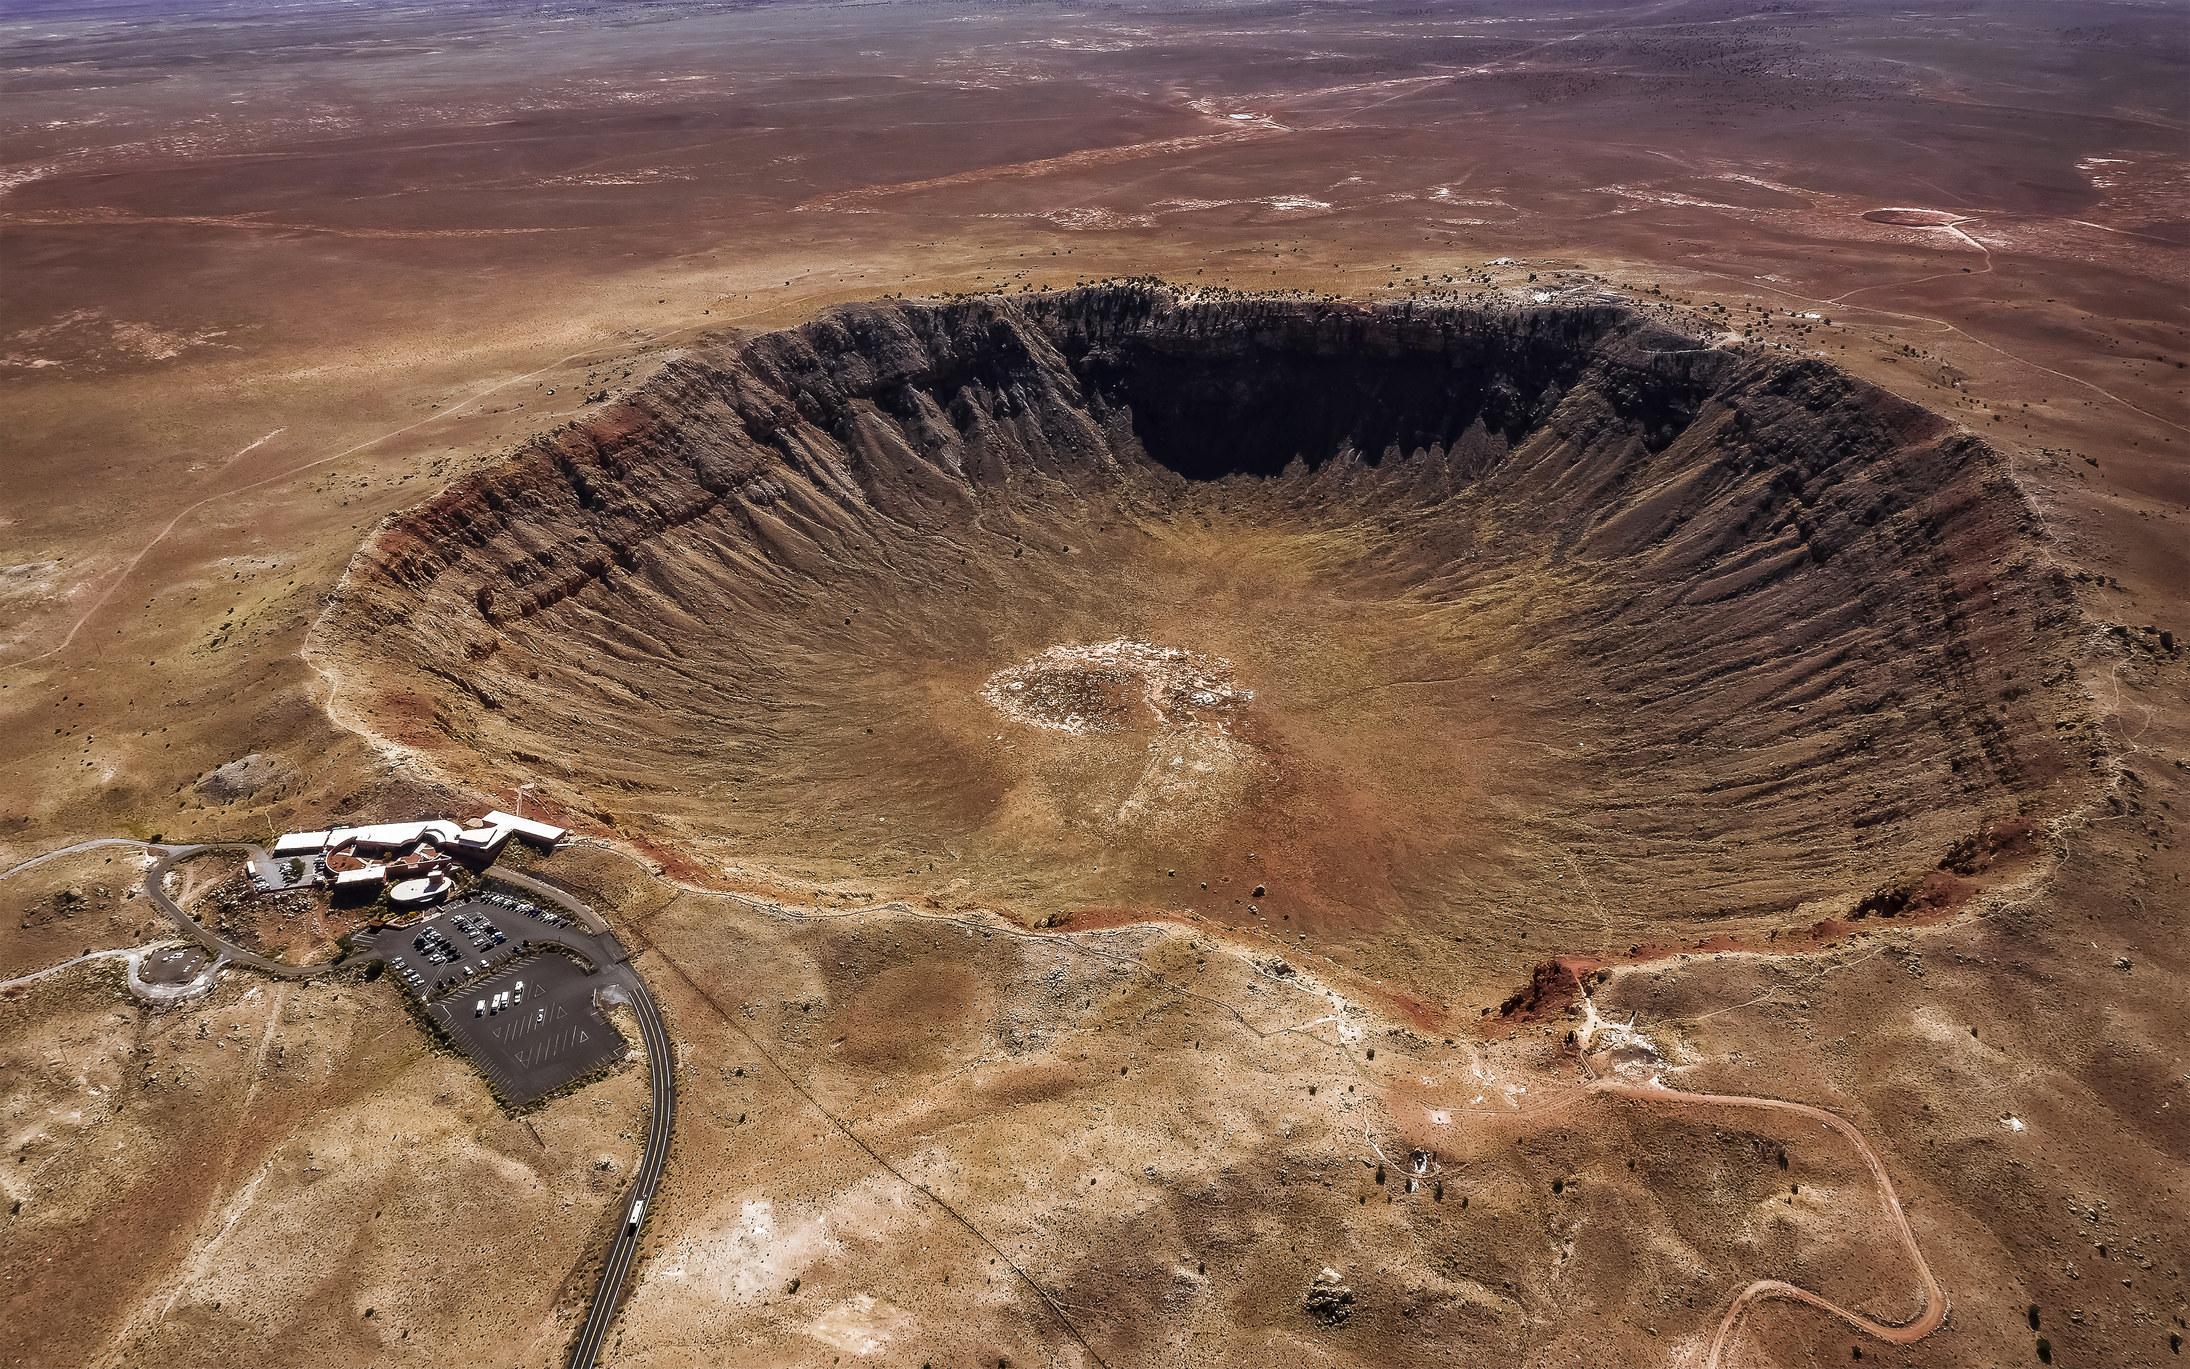 bird's-eye view of a giant crater with rippled edges in the ground